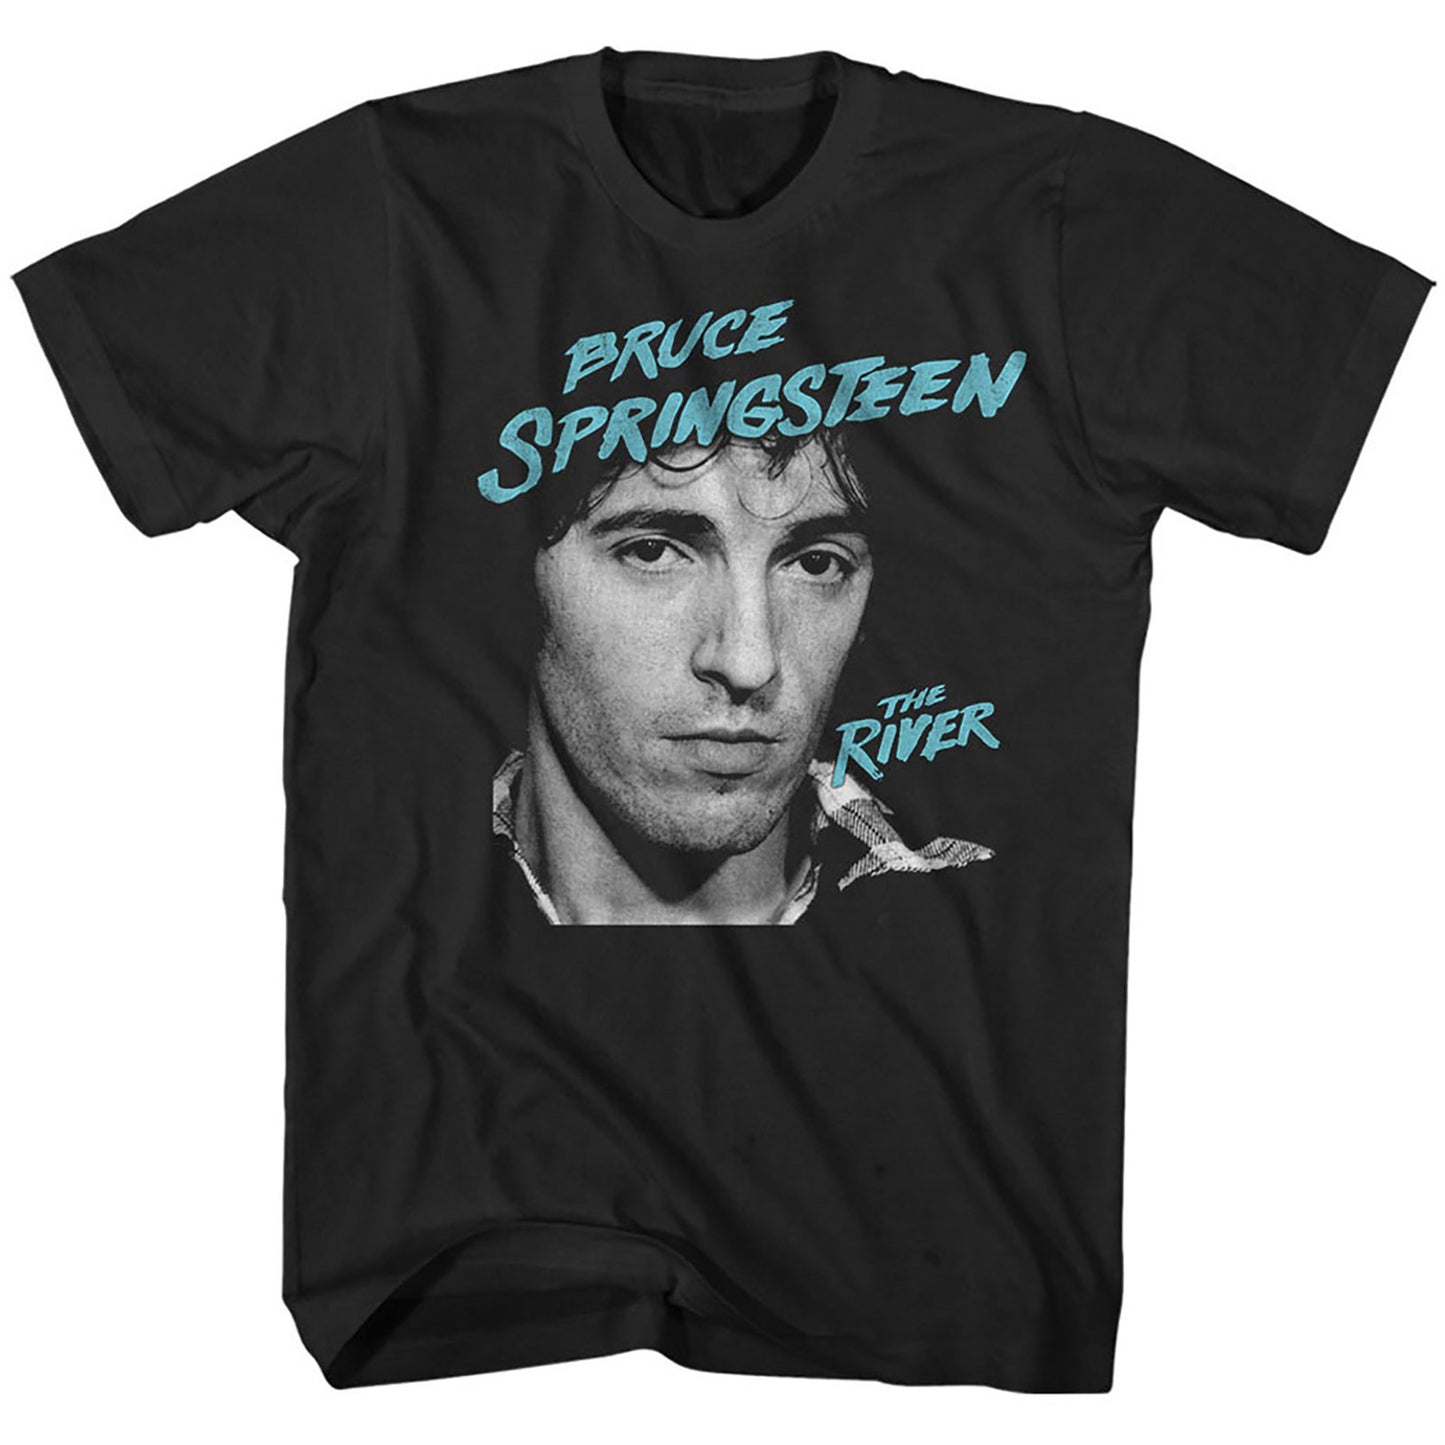 Bruce Springsteen The River T-Shirt